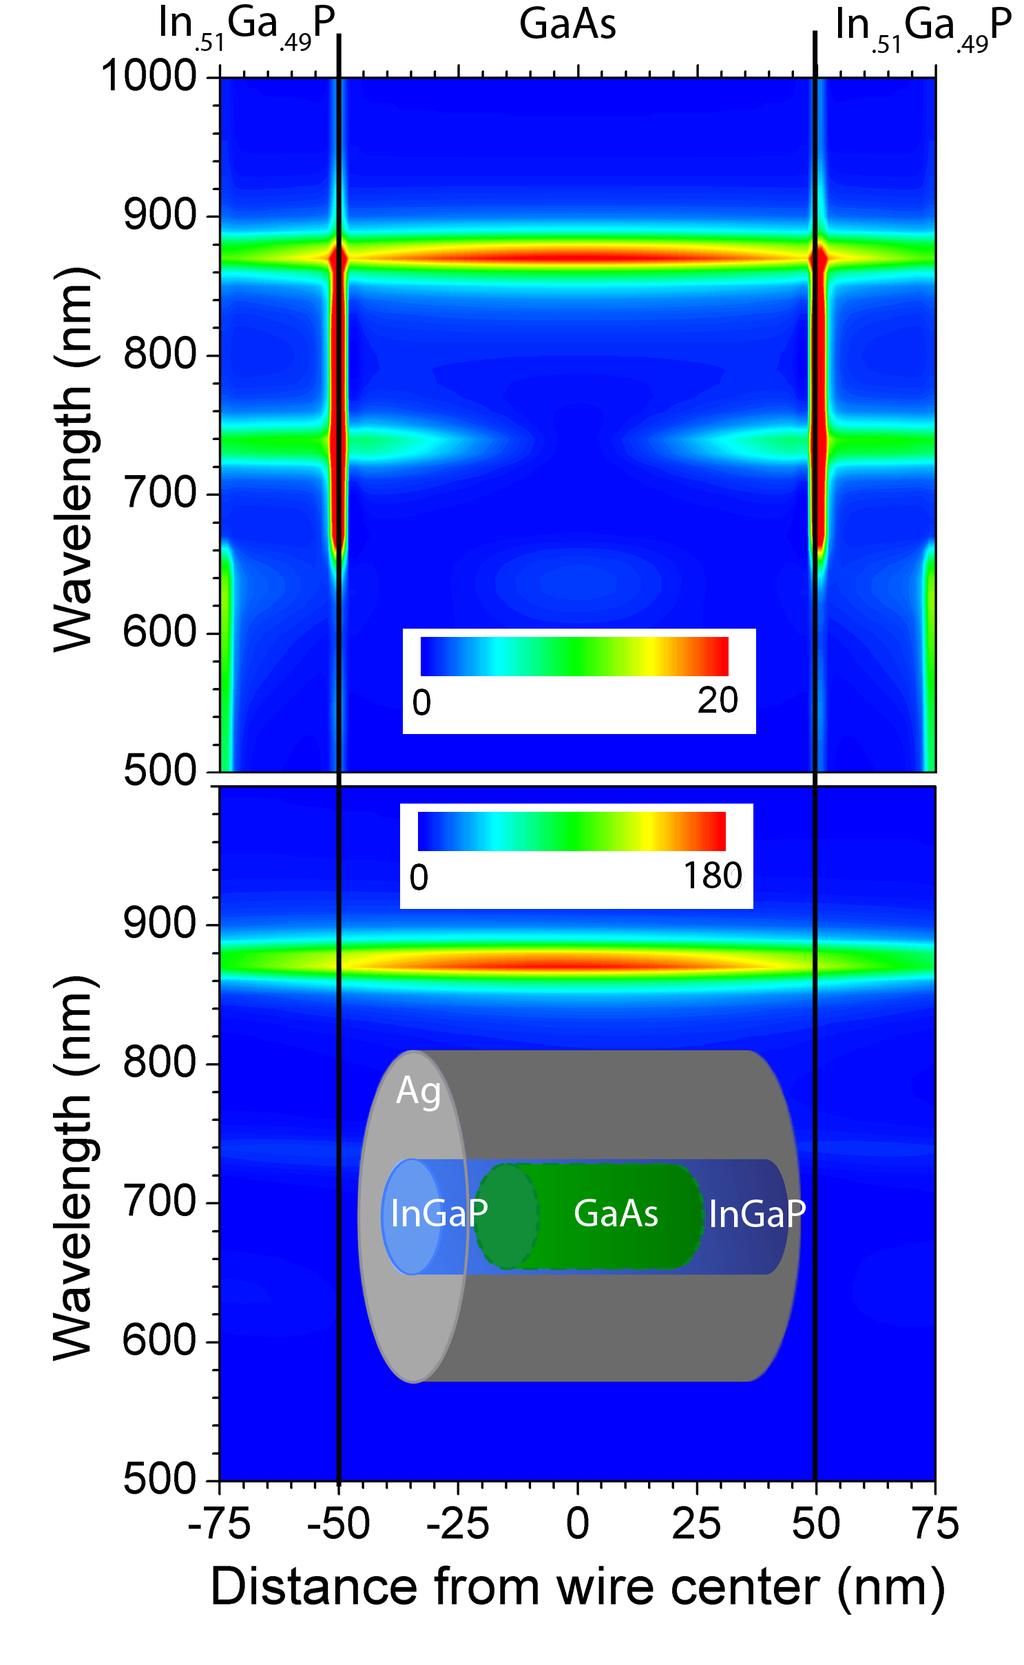 Figure 6.2. Resonant modes for a structure with GaAs active layer (a = 36 nm, L A = 100 nm), In 0.51 Ga 0.49 P cladding (s = 5 nm, L C = 25 nm), and Ag coating thickness T = 100 nm.